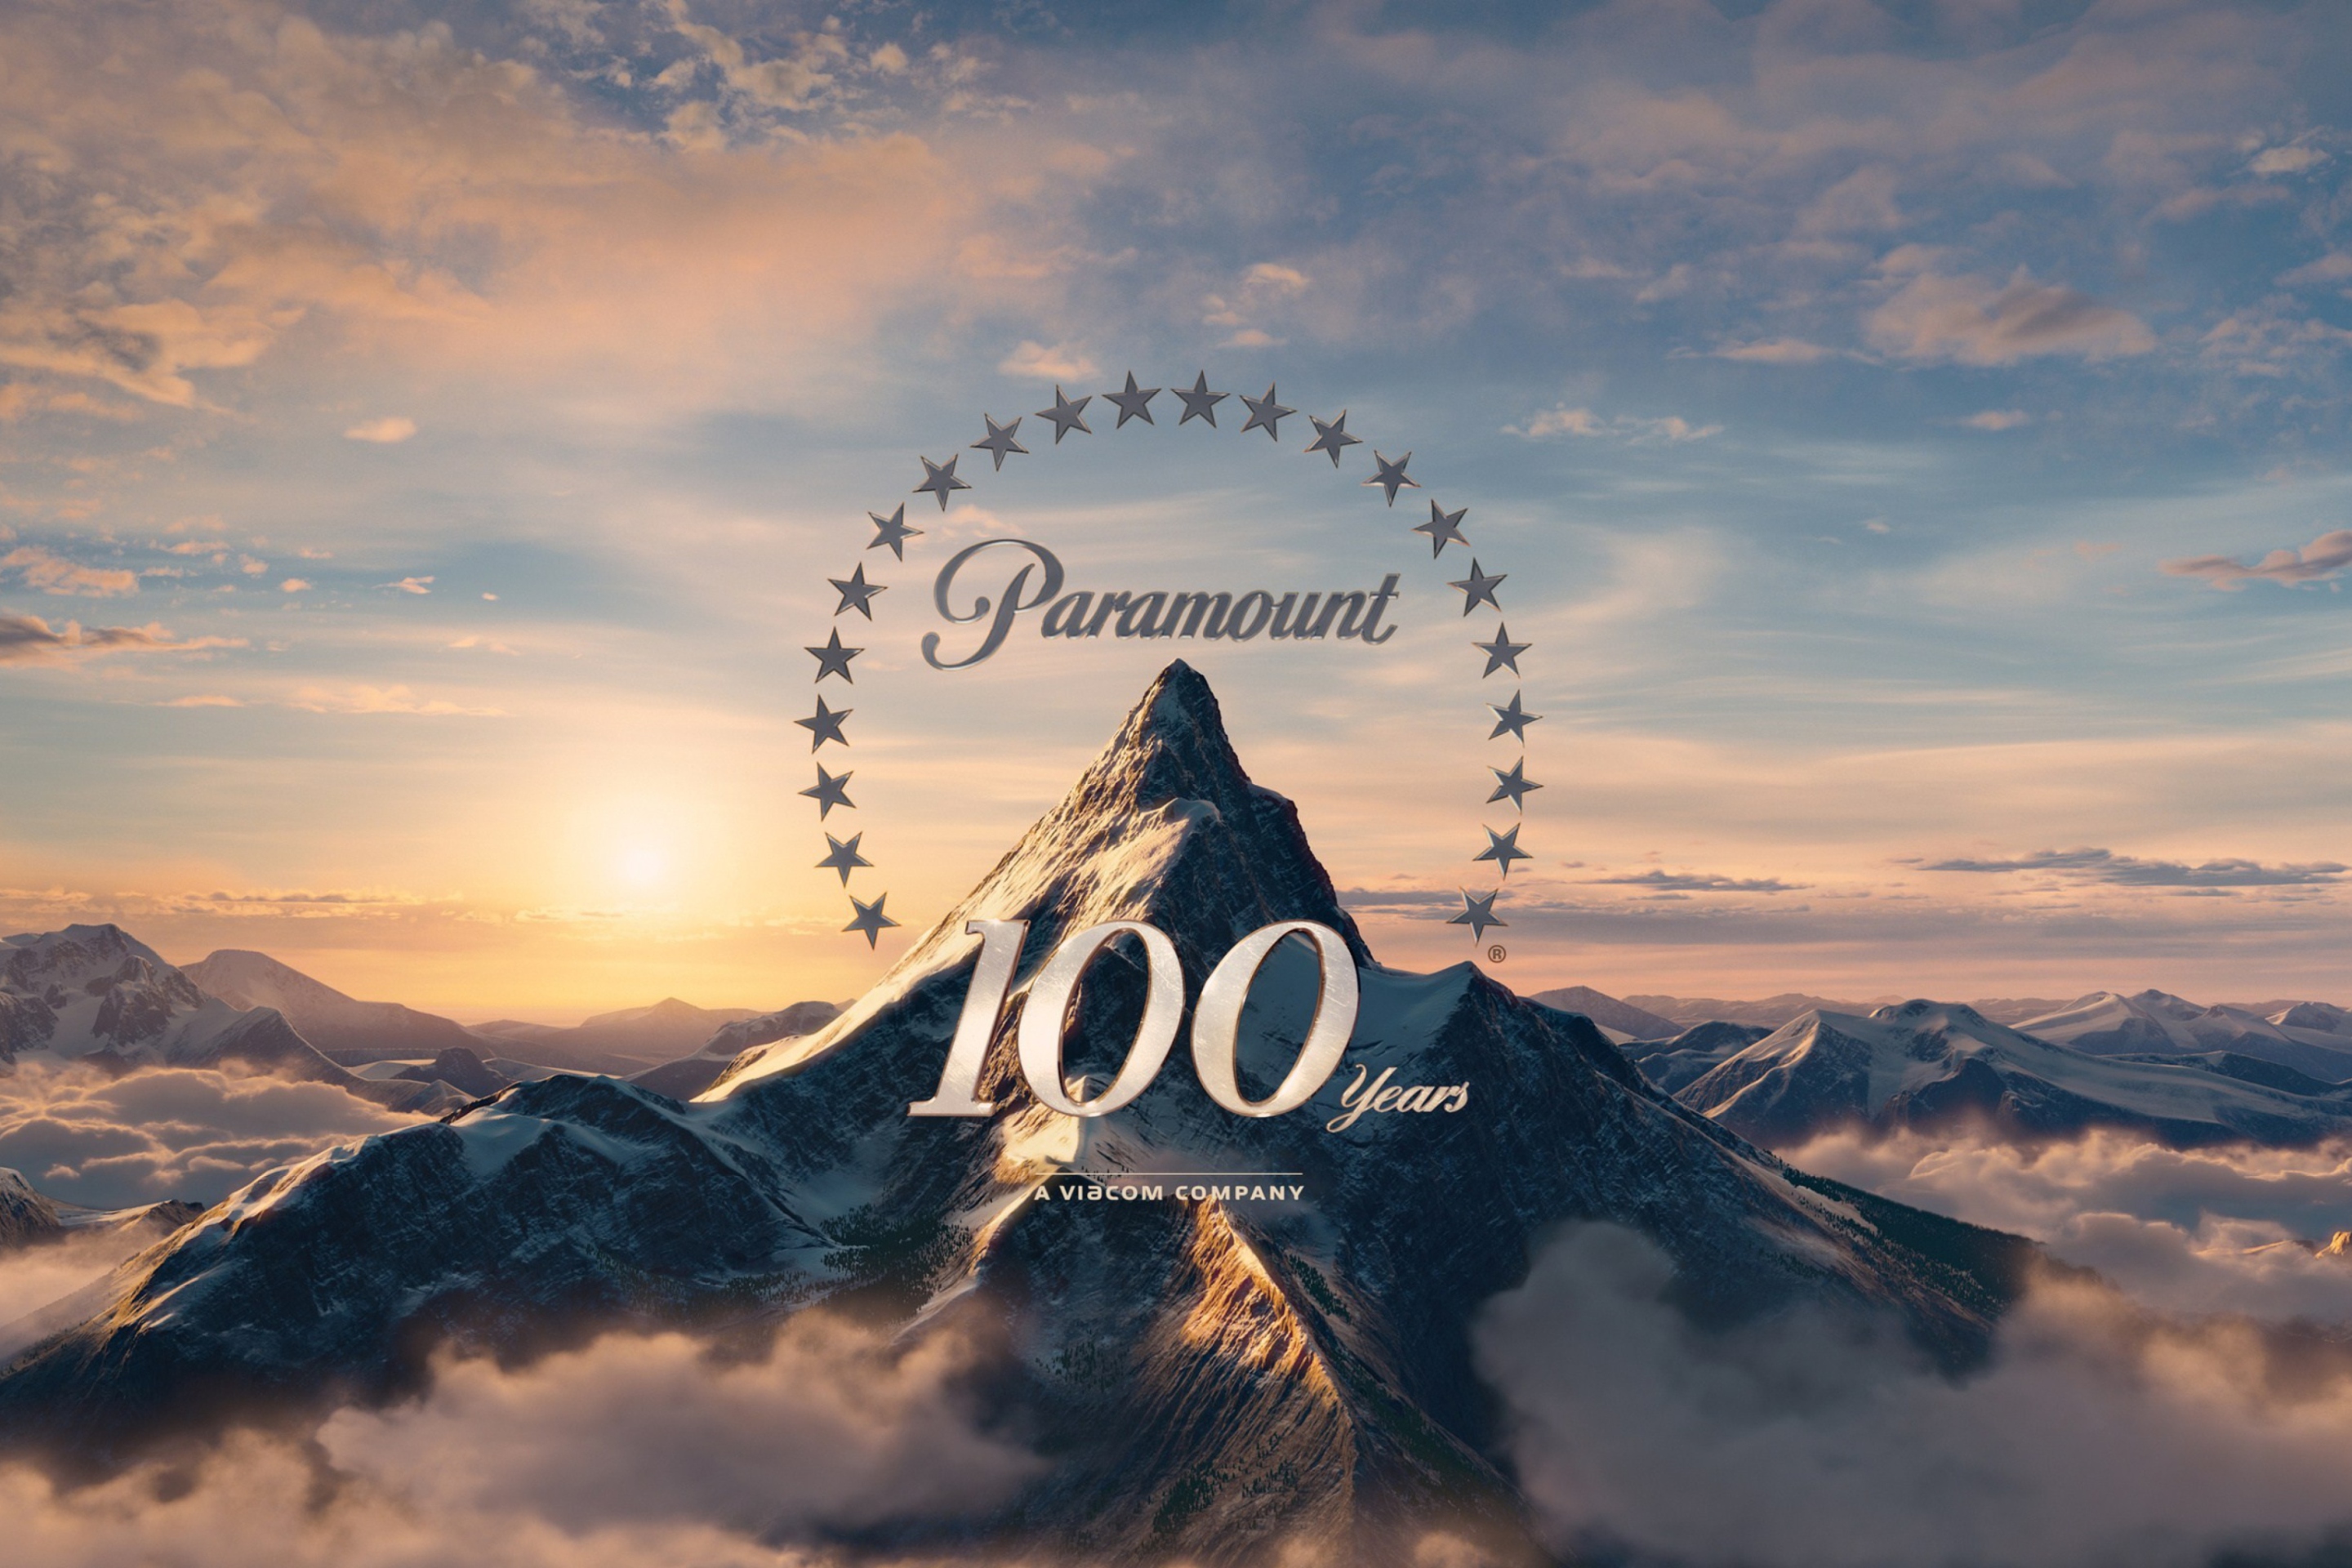 Paramount Pictures 100 Years wallpaper 2880x1920